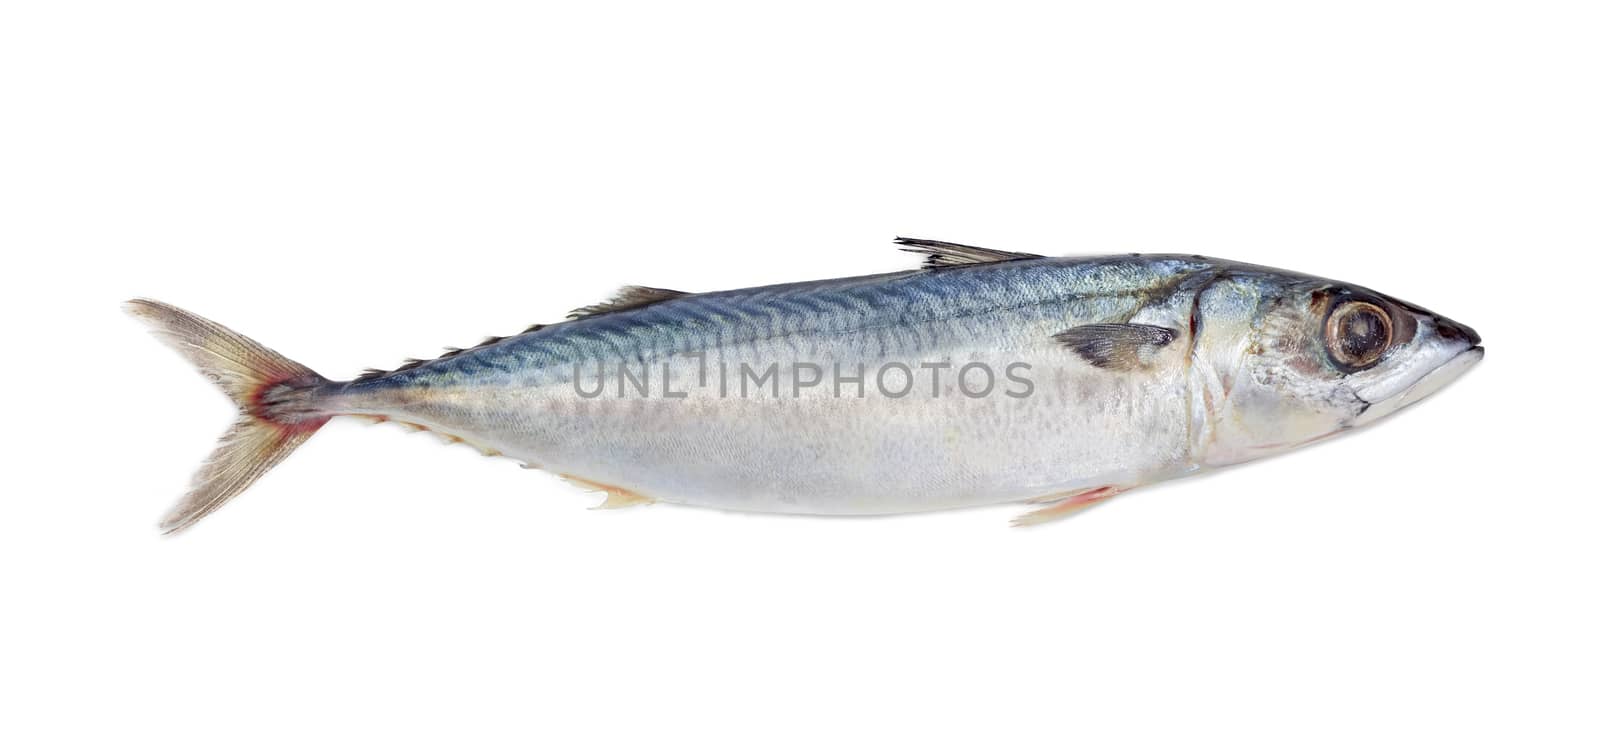 Uncooked bullet tuna on a light background by anmbph